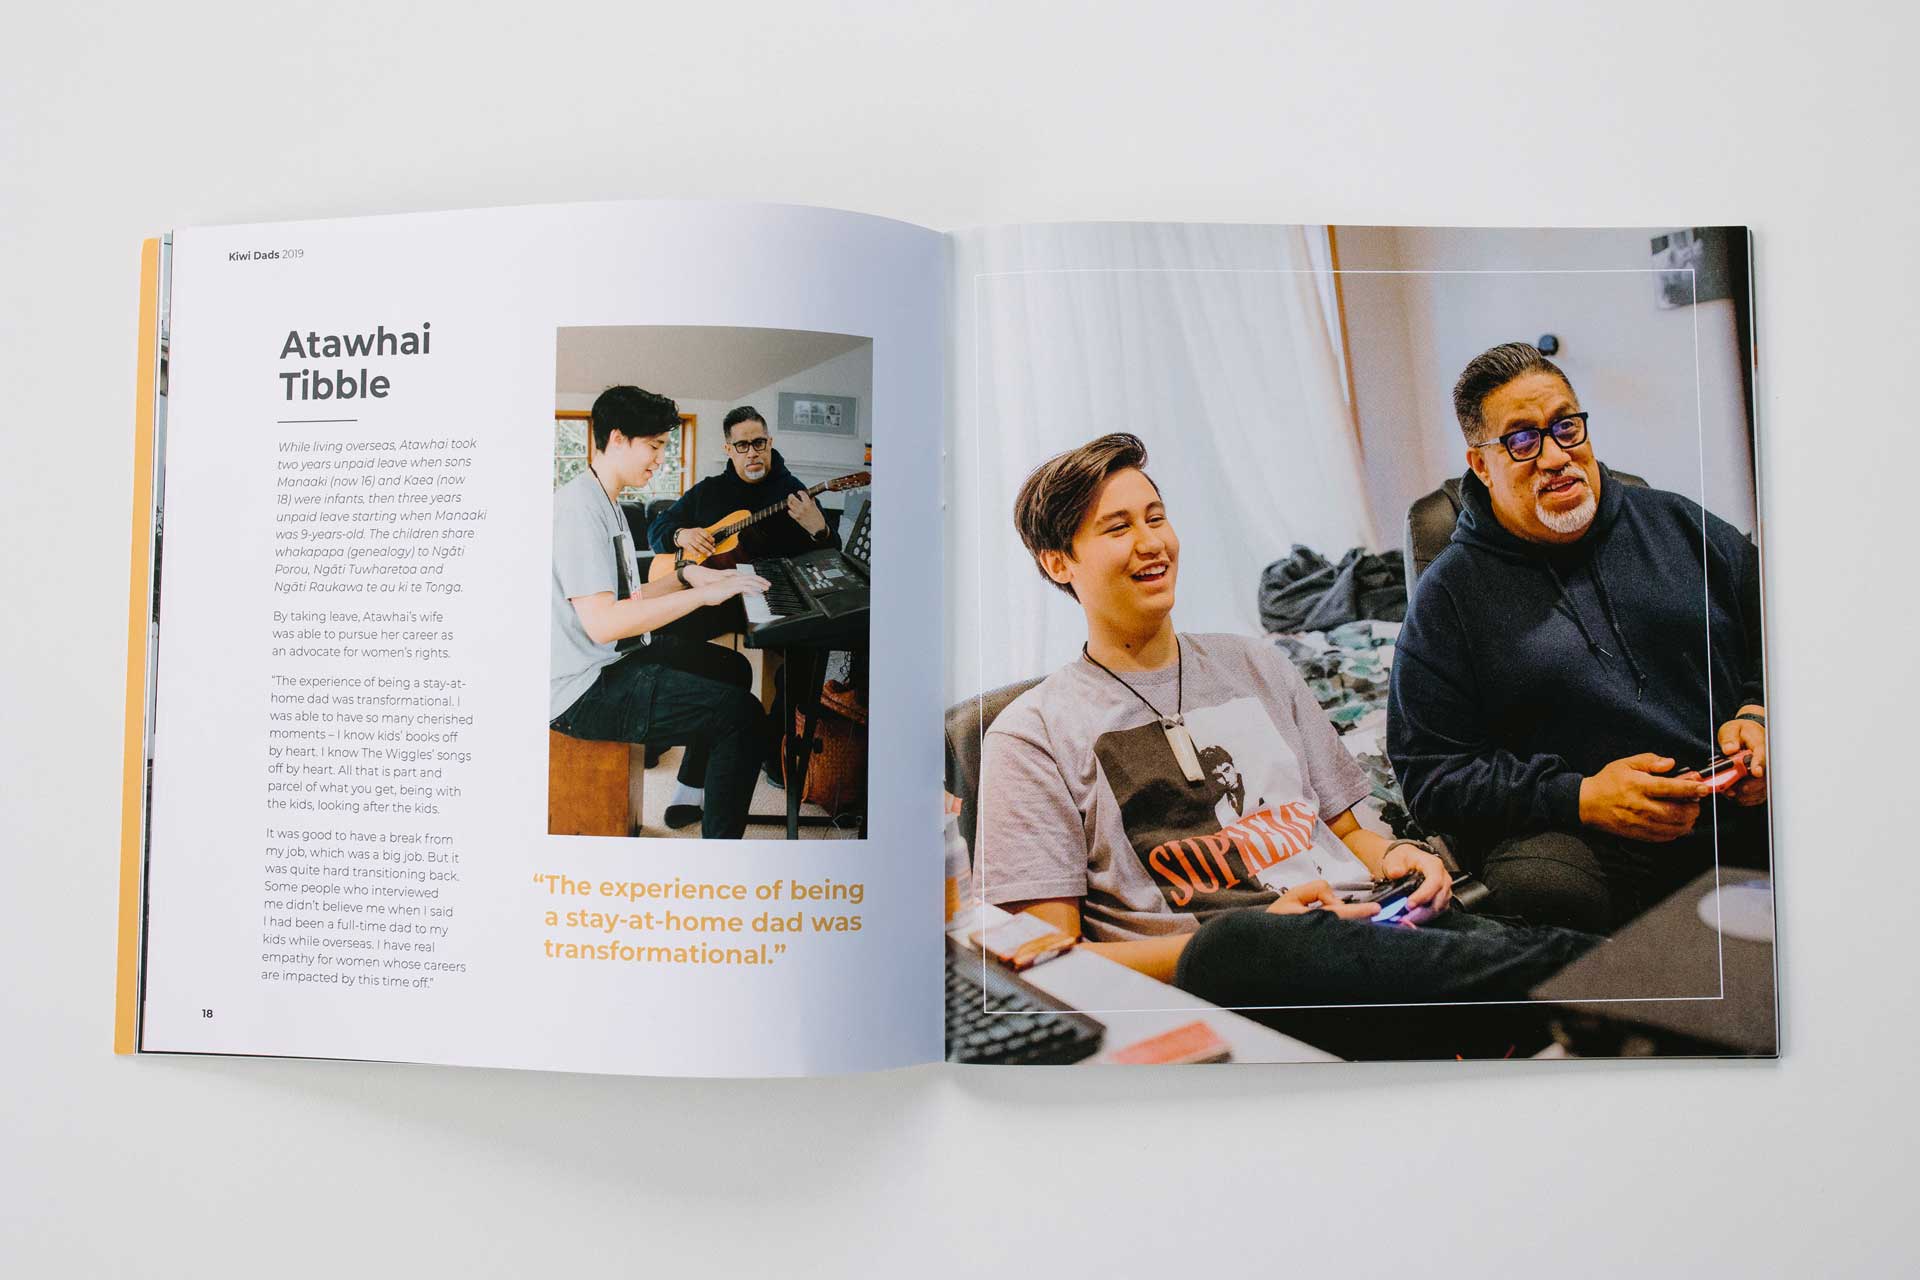 kiwi dads booklet photo of atawhai tibble playing guitar and playstation with son photos by sarah weber photography